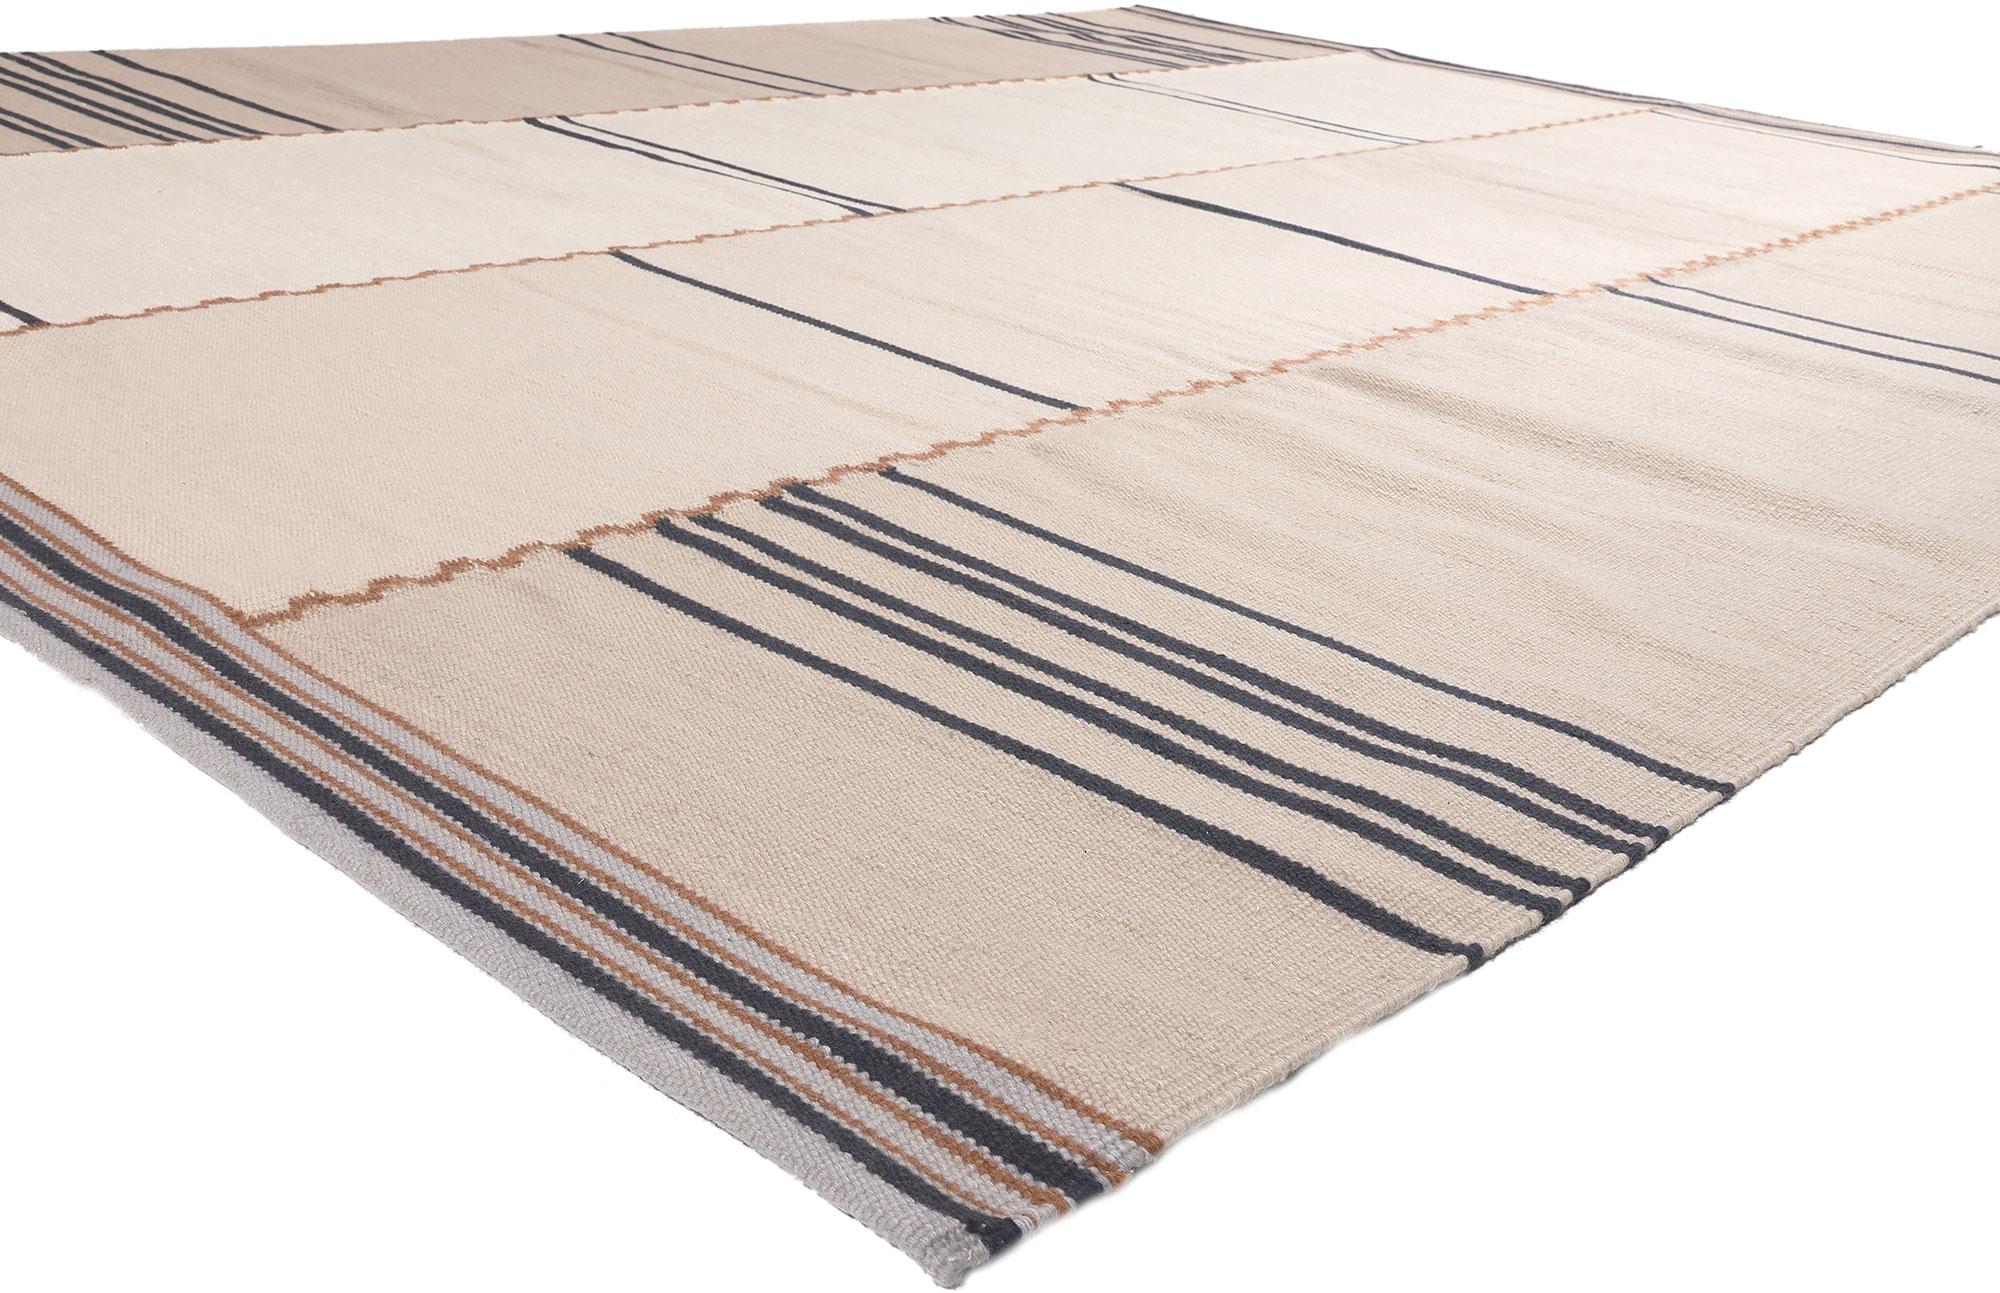 30956 New Swedish Inspired Kilim Rug, 10'02 x 12'10. Displaying simplicity with incredible detail and texture, this handwoven wool Swedish inspired Kilim rug provides a feeling of cozy contentment without the clutter. The eye-catching ladder stripe